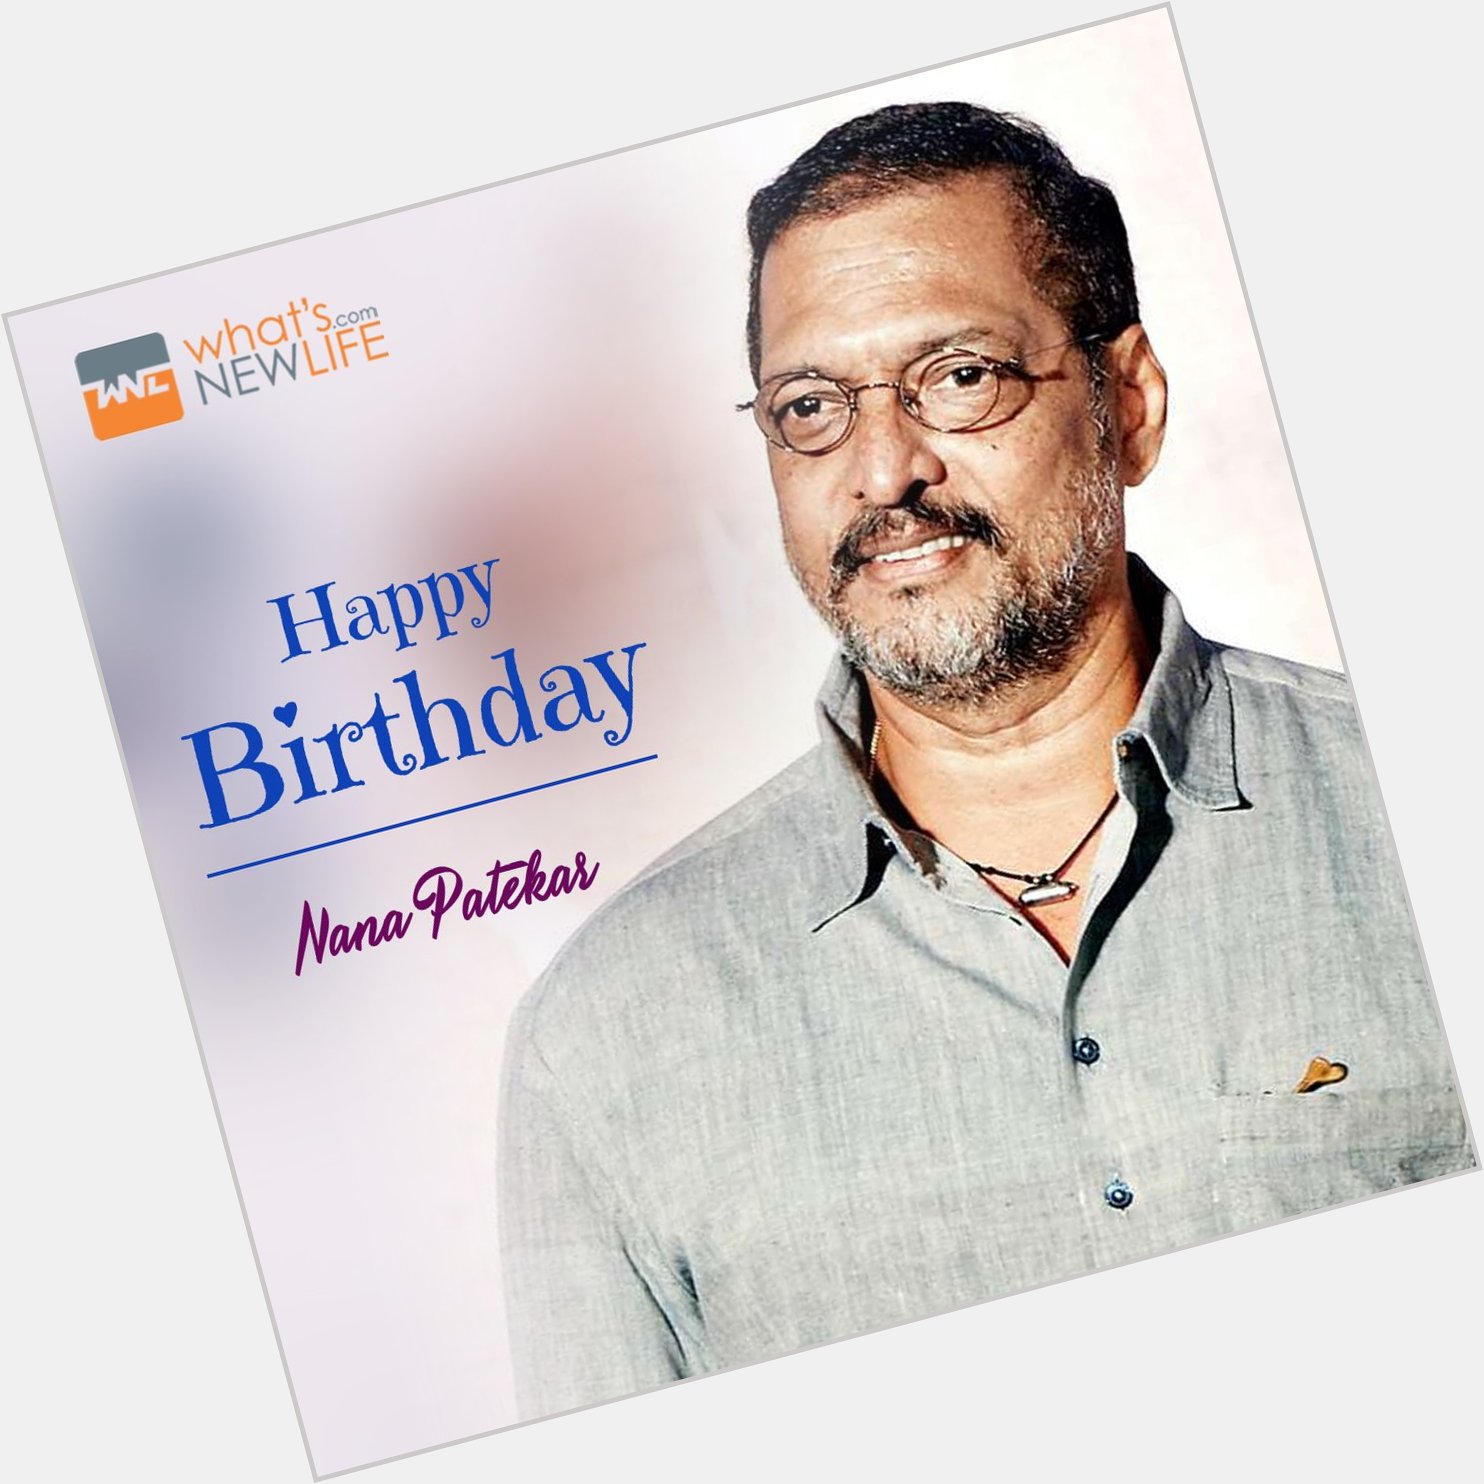 What\s New Life wishes to super talented actor in Bollywood Industry Nana Patekar very happy birthday today. 